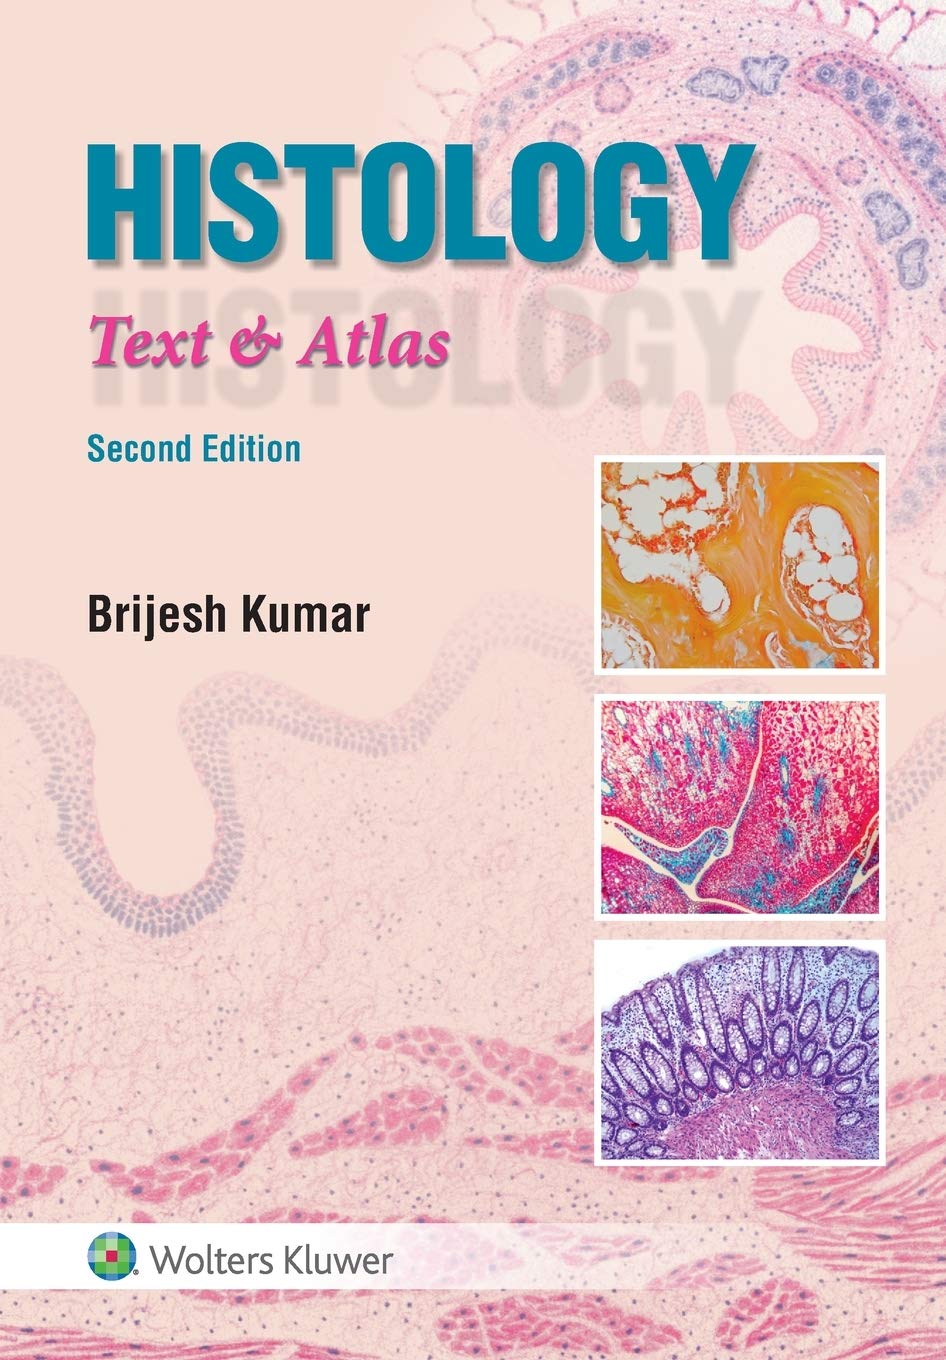 histology-text-atlas-with-point-access-codes